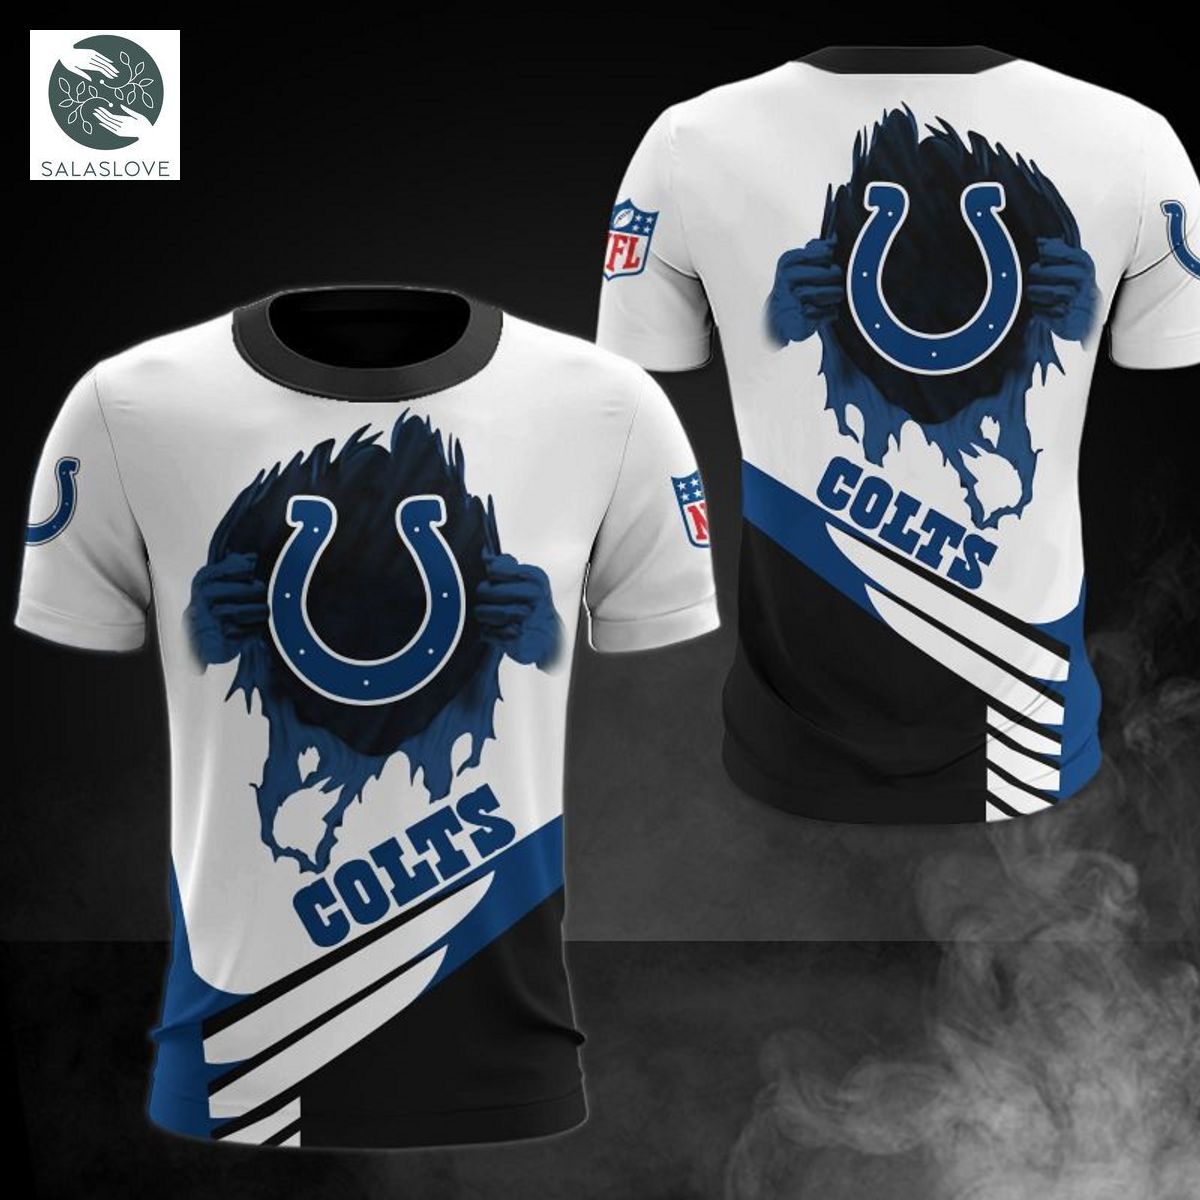 Indianapolis Colts T-shirt cool graphic gift for men